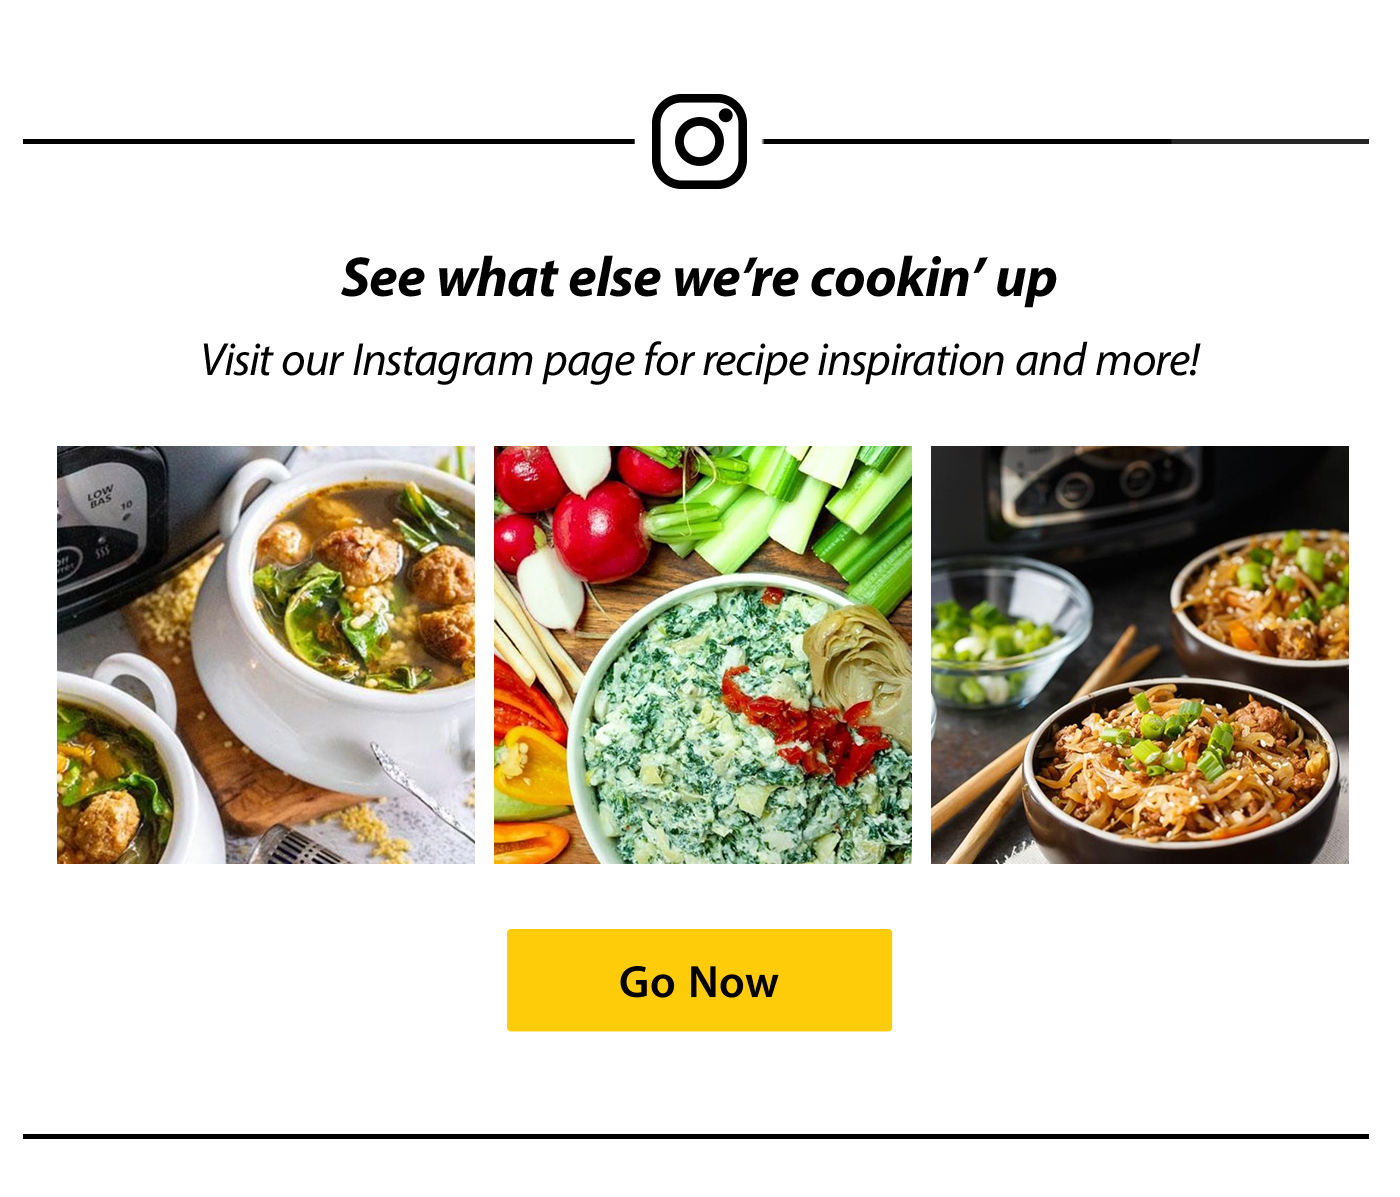 See what else we're cookin' up. Visit our Instagram page for recipe inspiration and more! Go Now